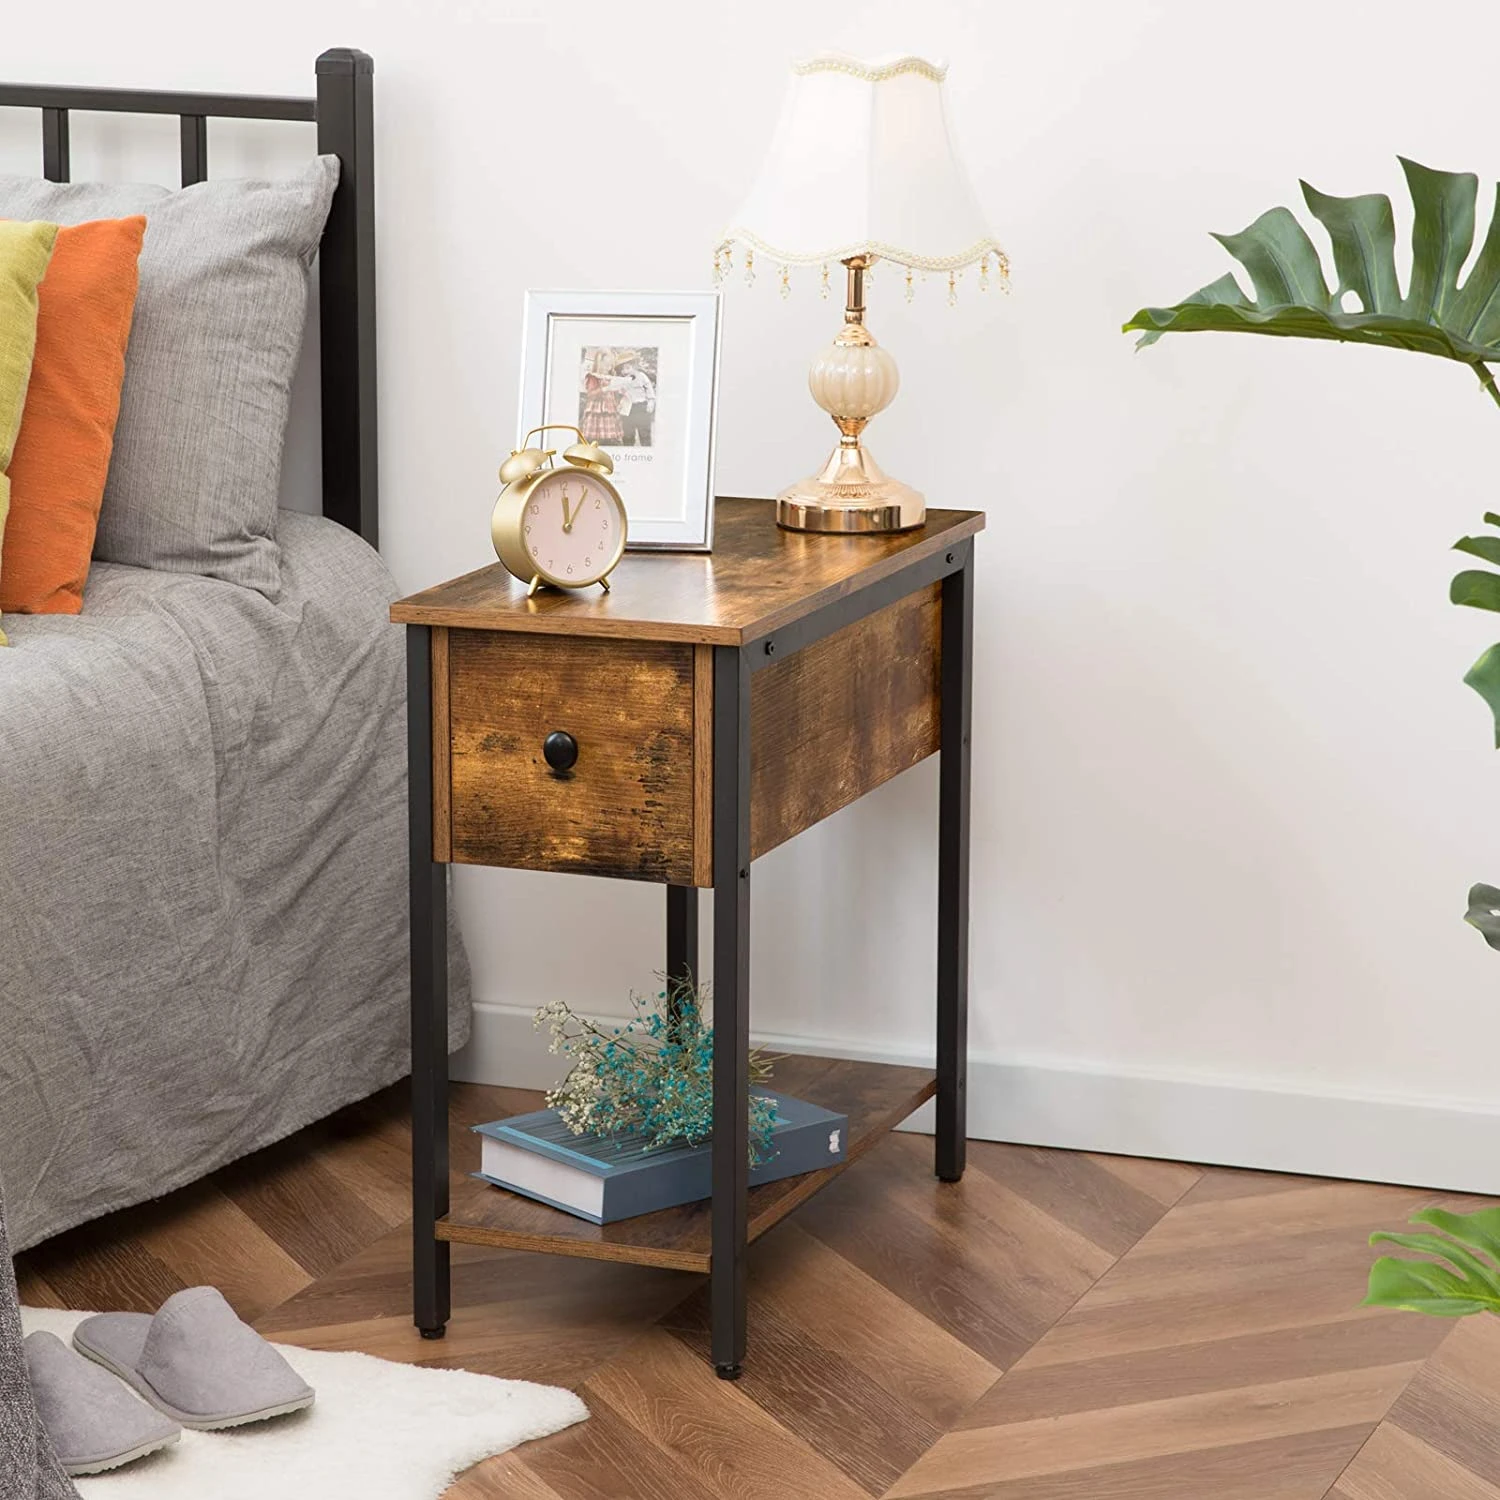 Small Spaces Mesa Auxiliar Pequena Dormitorio Sturdy Wood Rustic Brown And Black Bed Side Table With Drawers